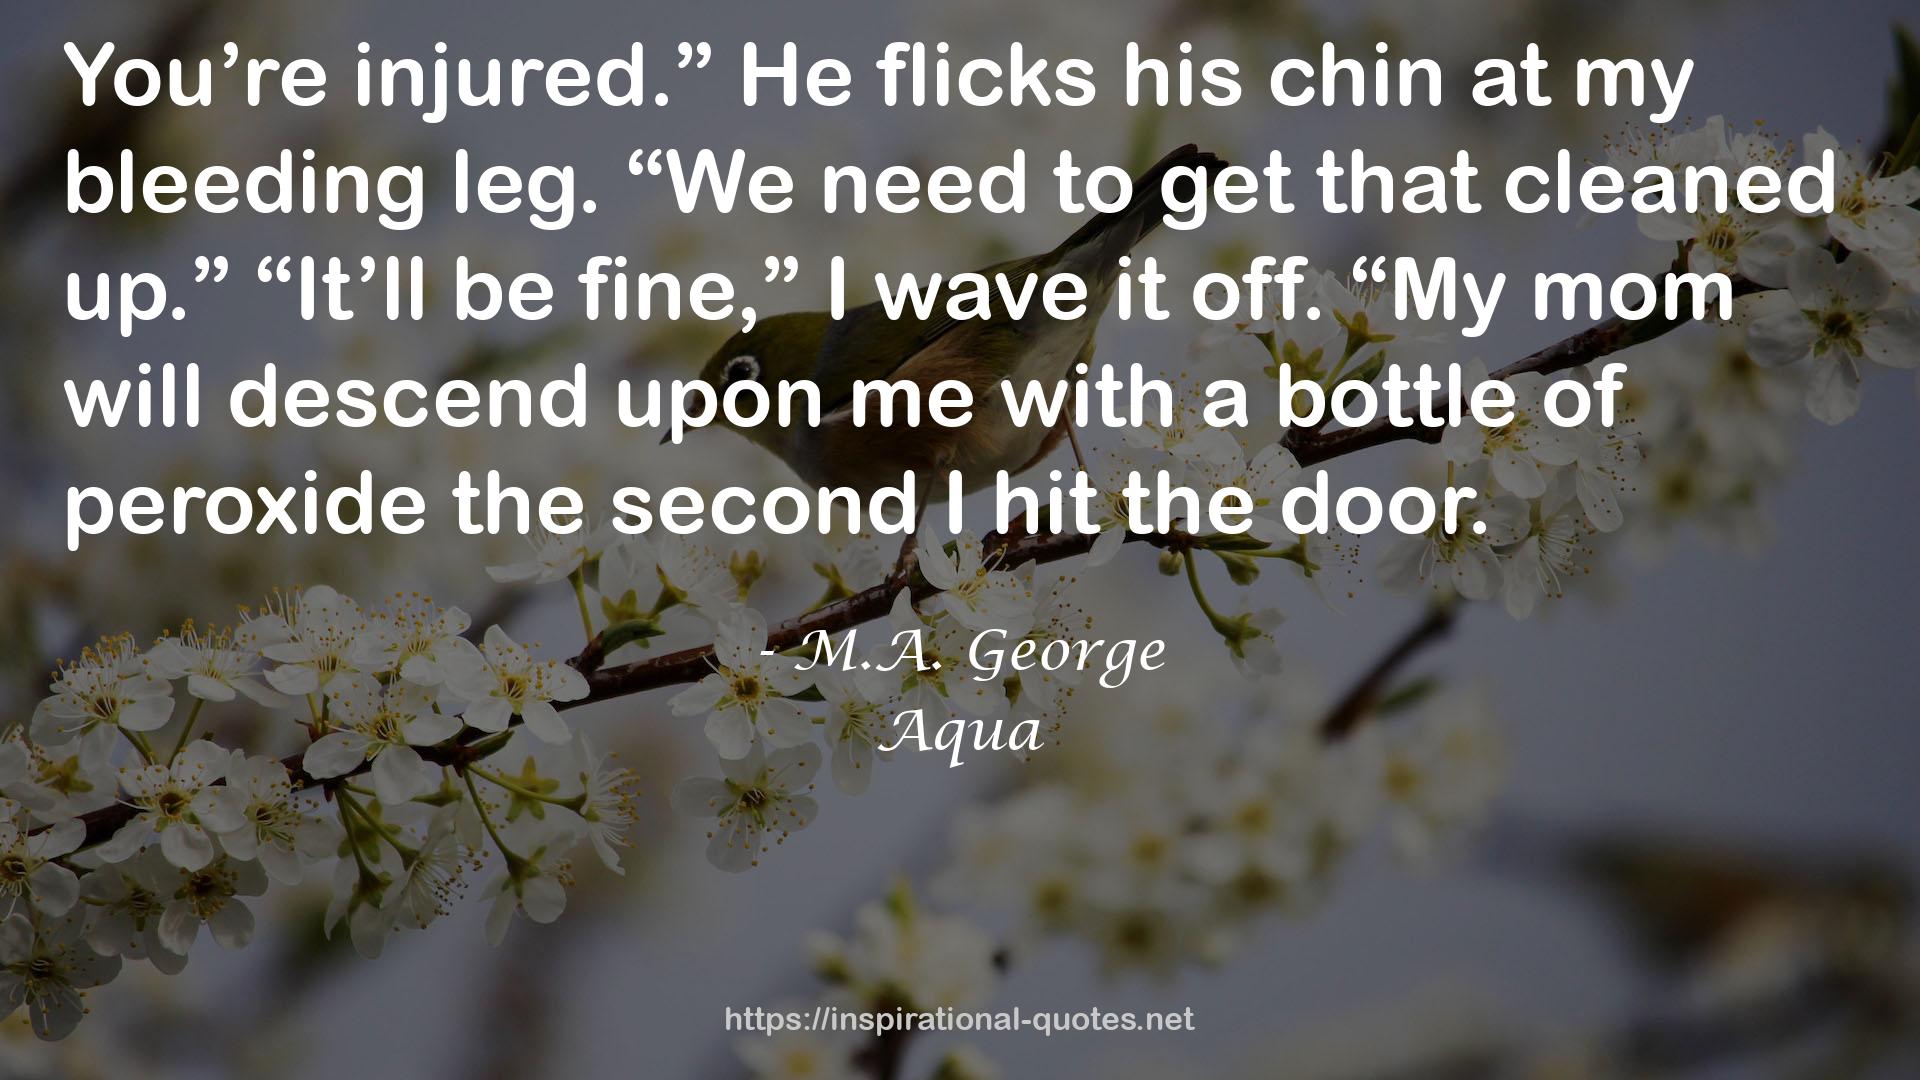 M.A. George QUOTES